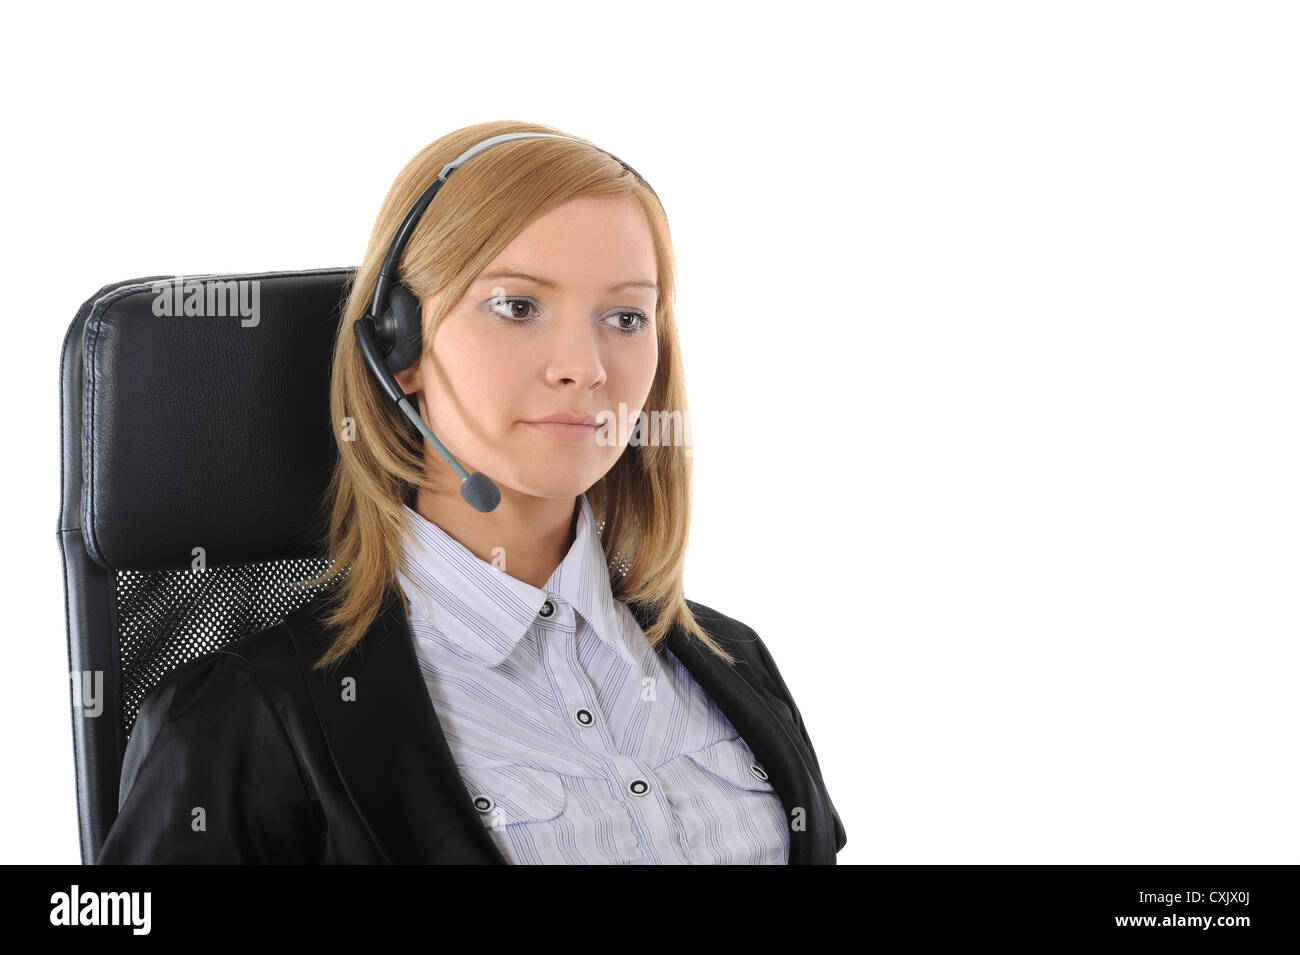 Young office worker with headset. Stock Photo